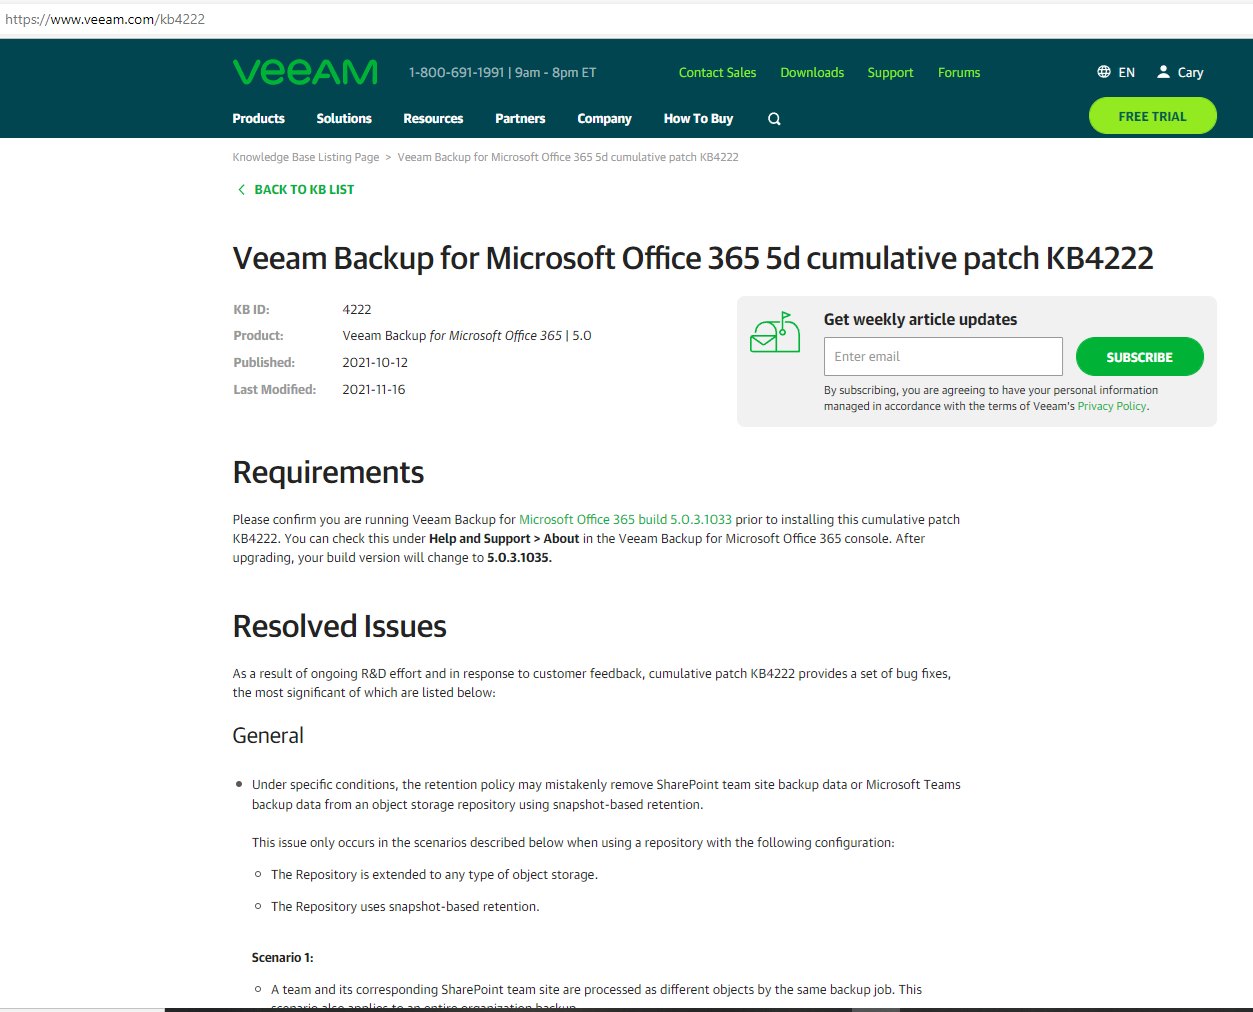 121421 0428 HowtoInstal1 - How to Install Veeam Backup for Microsoft Office 365 V5d cumulative patch KB4222